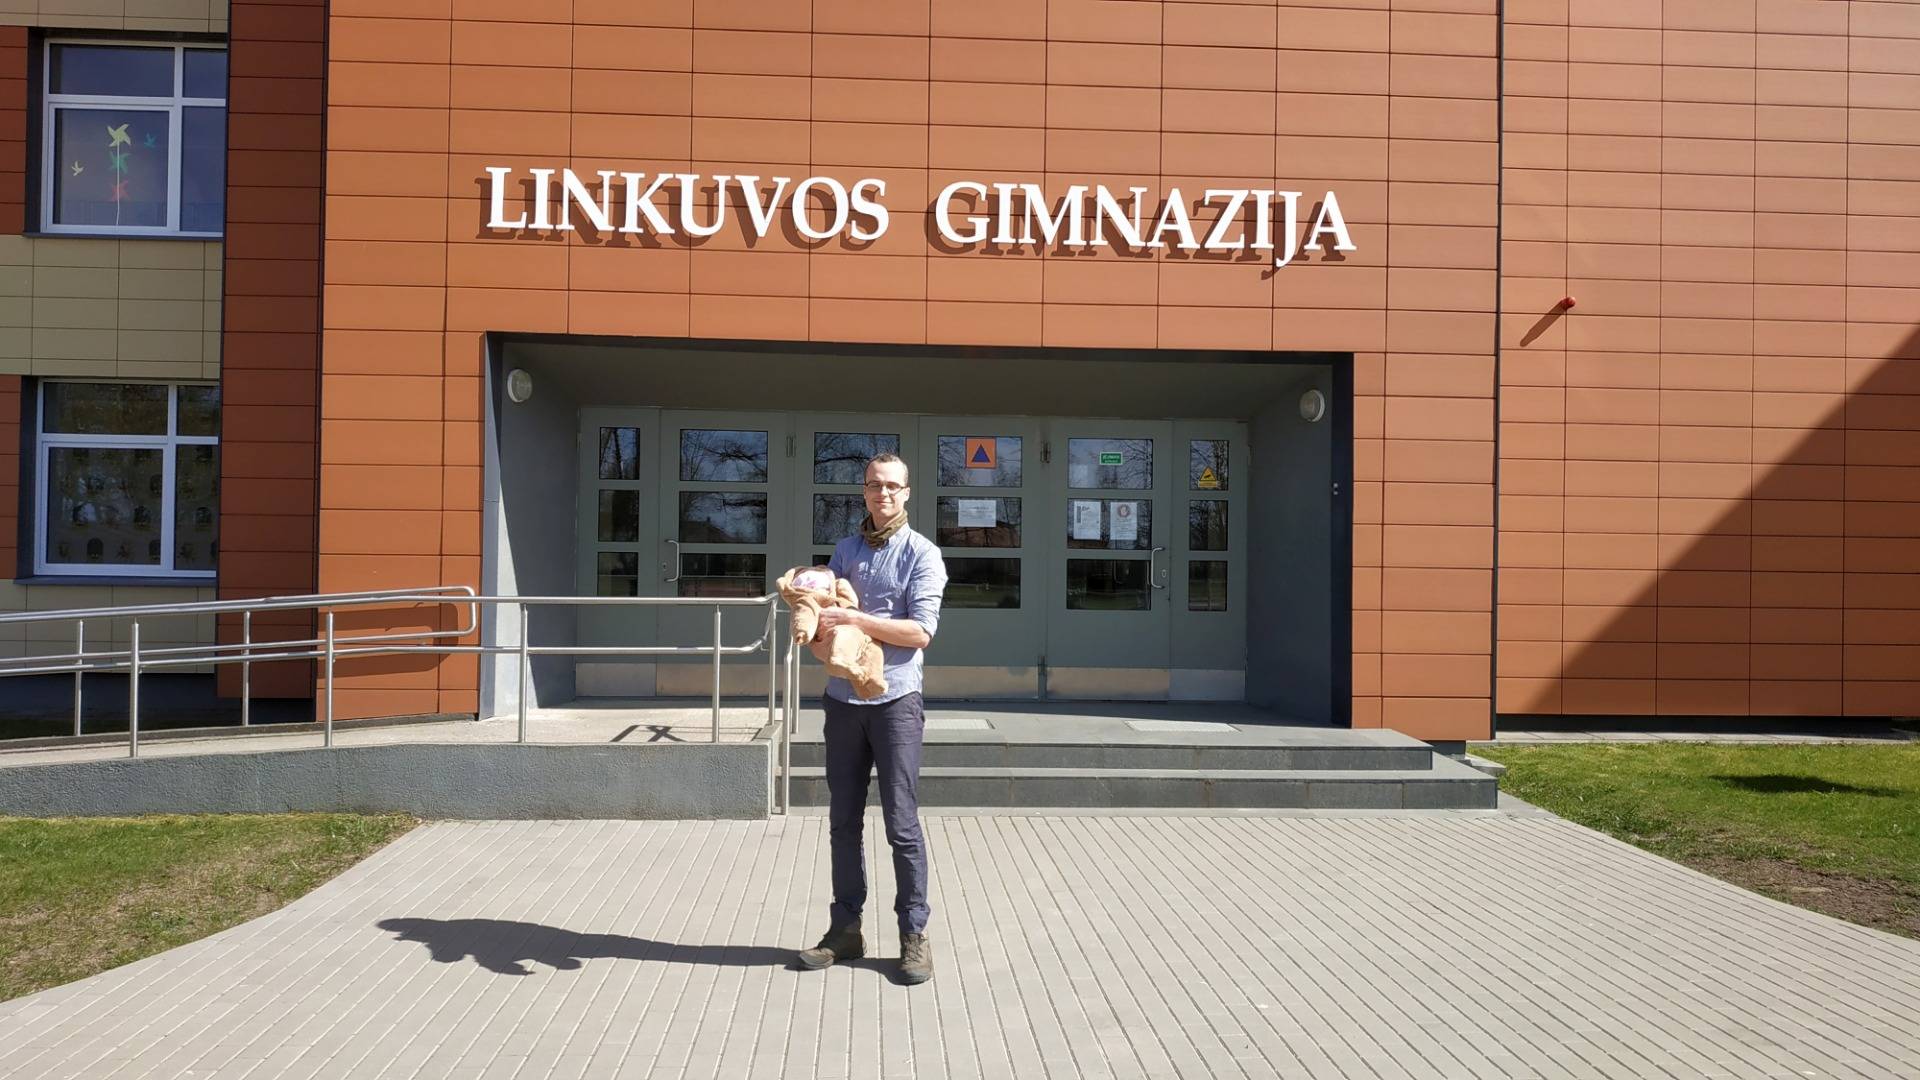 Tautvydas Šlevas (me) and my daughter Vakarė in front of the entrance to The Gymnasium of Linkuva